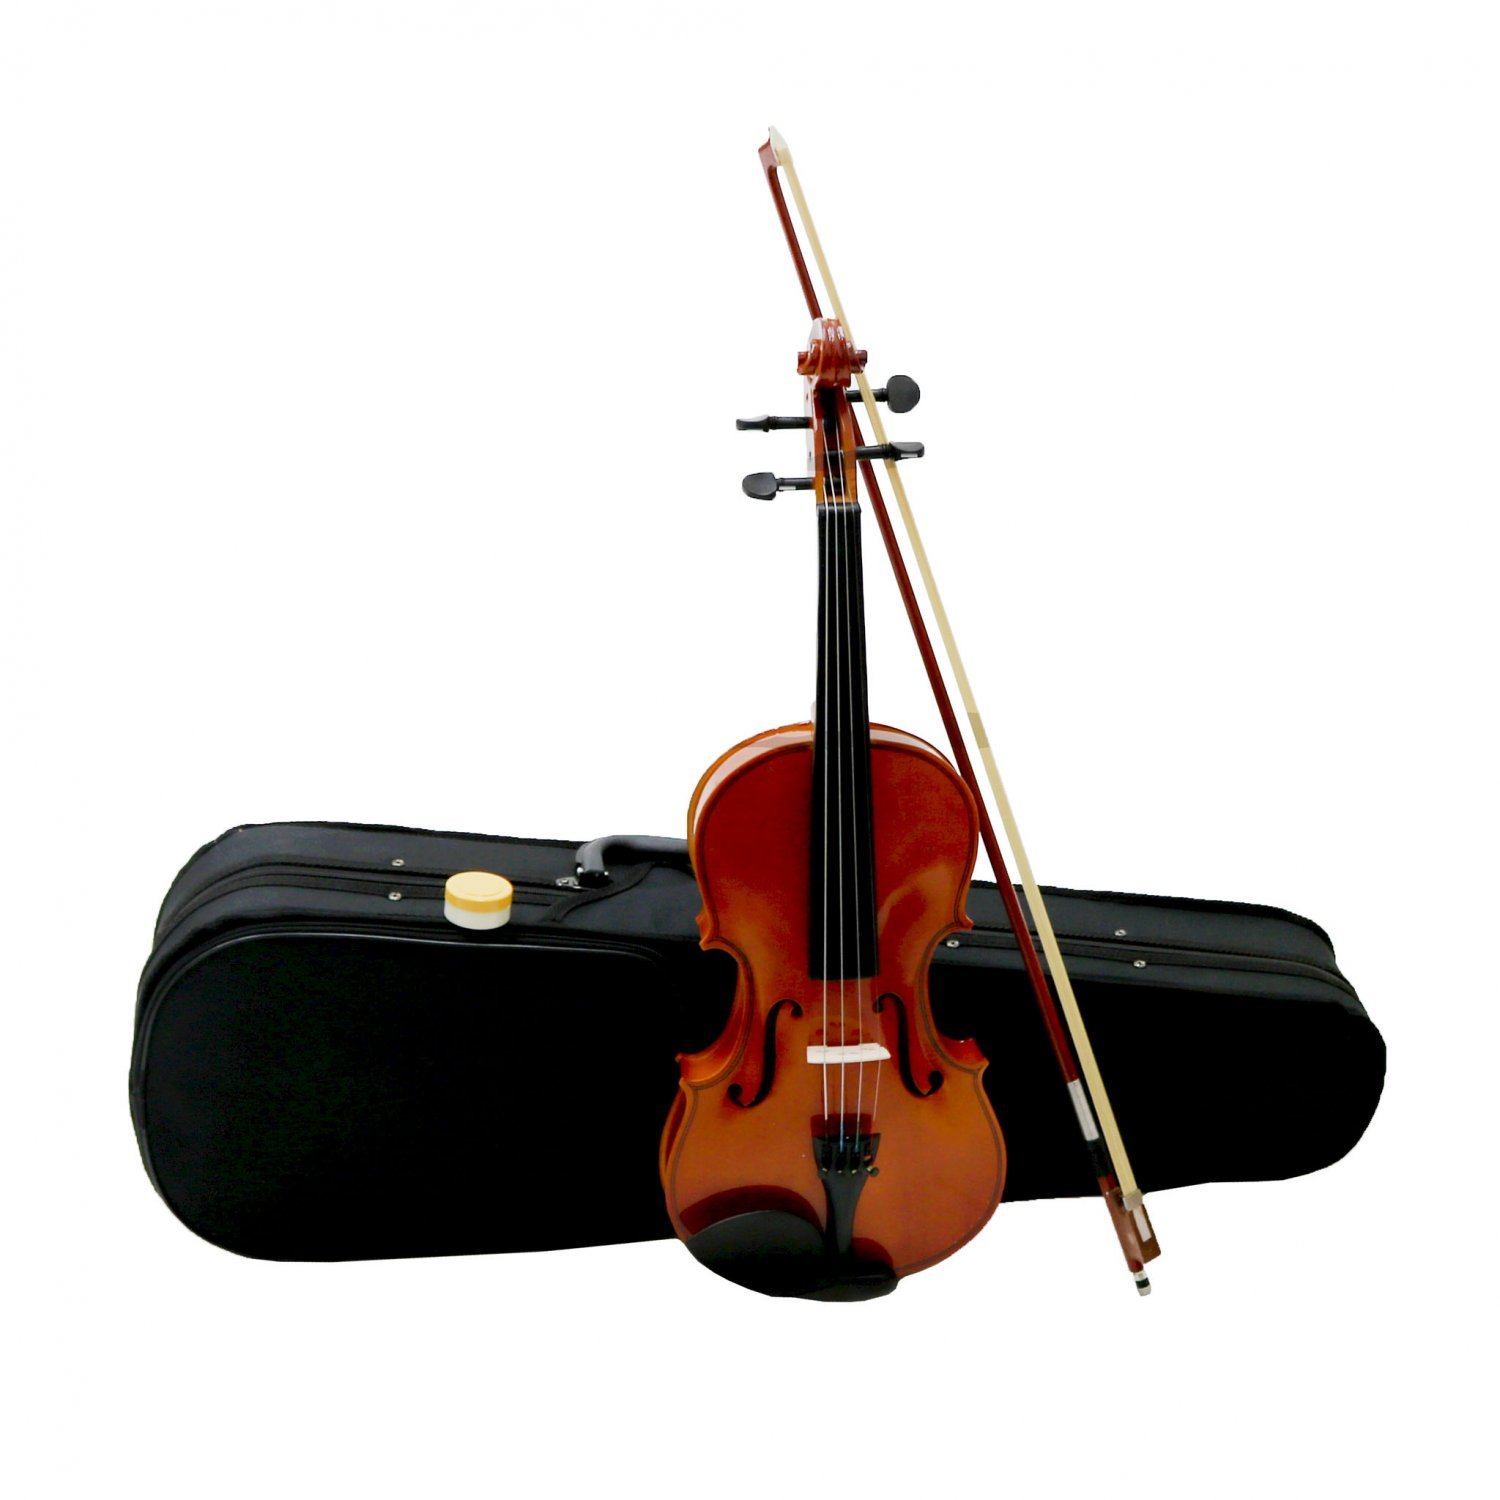 lifBetter Acoustic Violin 4/4 Natural Basswood Violins with Case Bow Rosin Violin For New Learner violin rosin bow case 